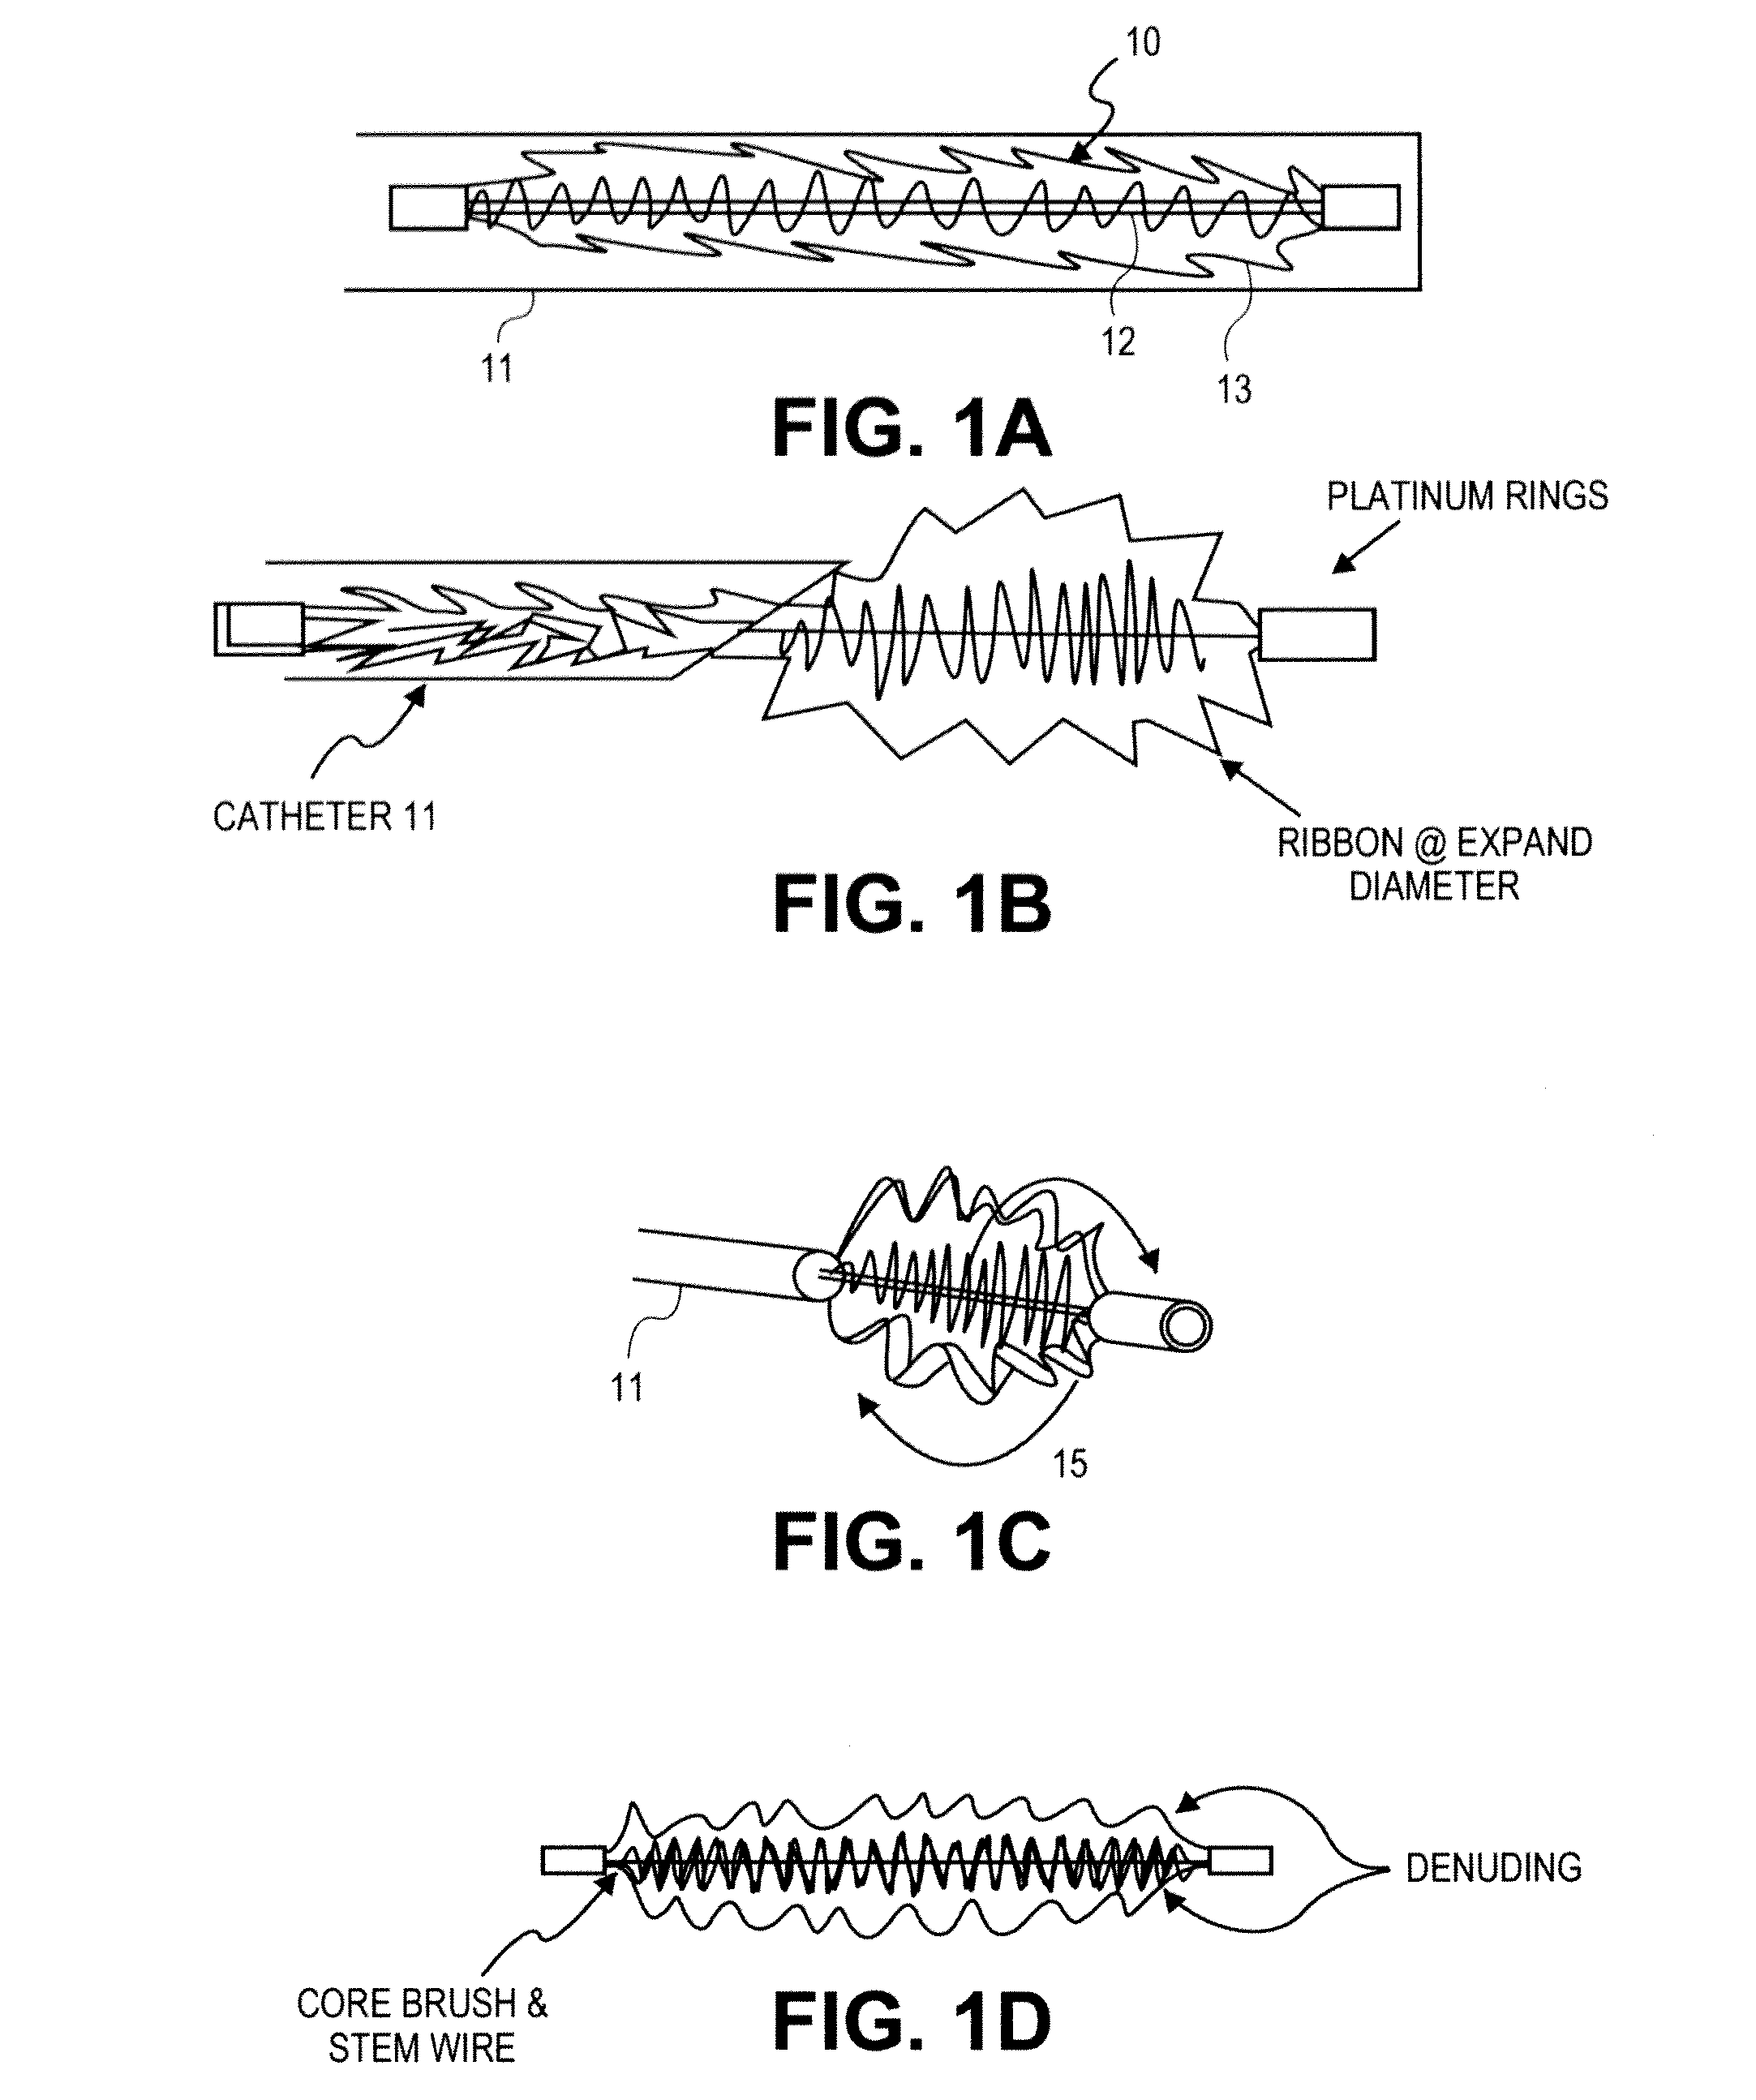 Methods and devices for deployment into a lumen